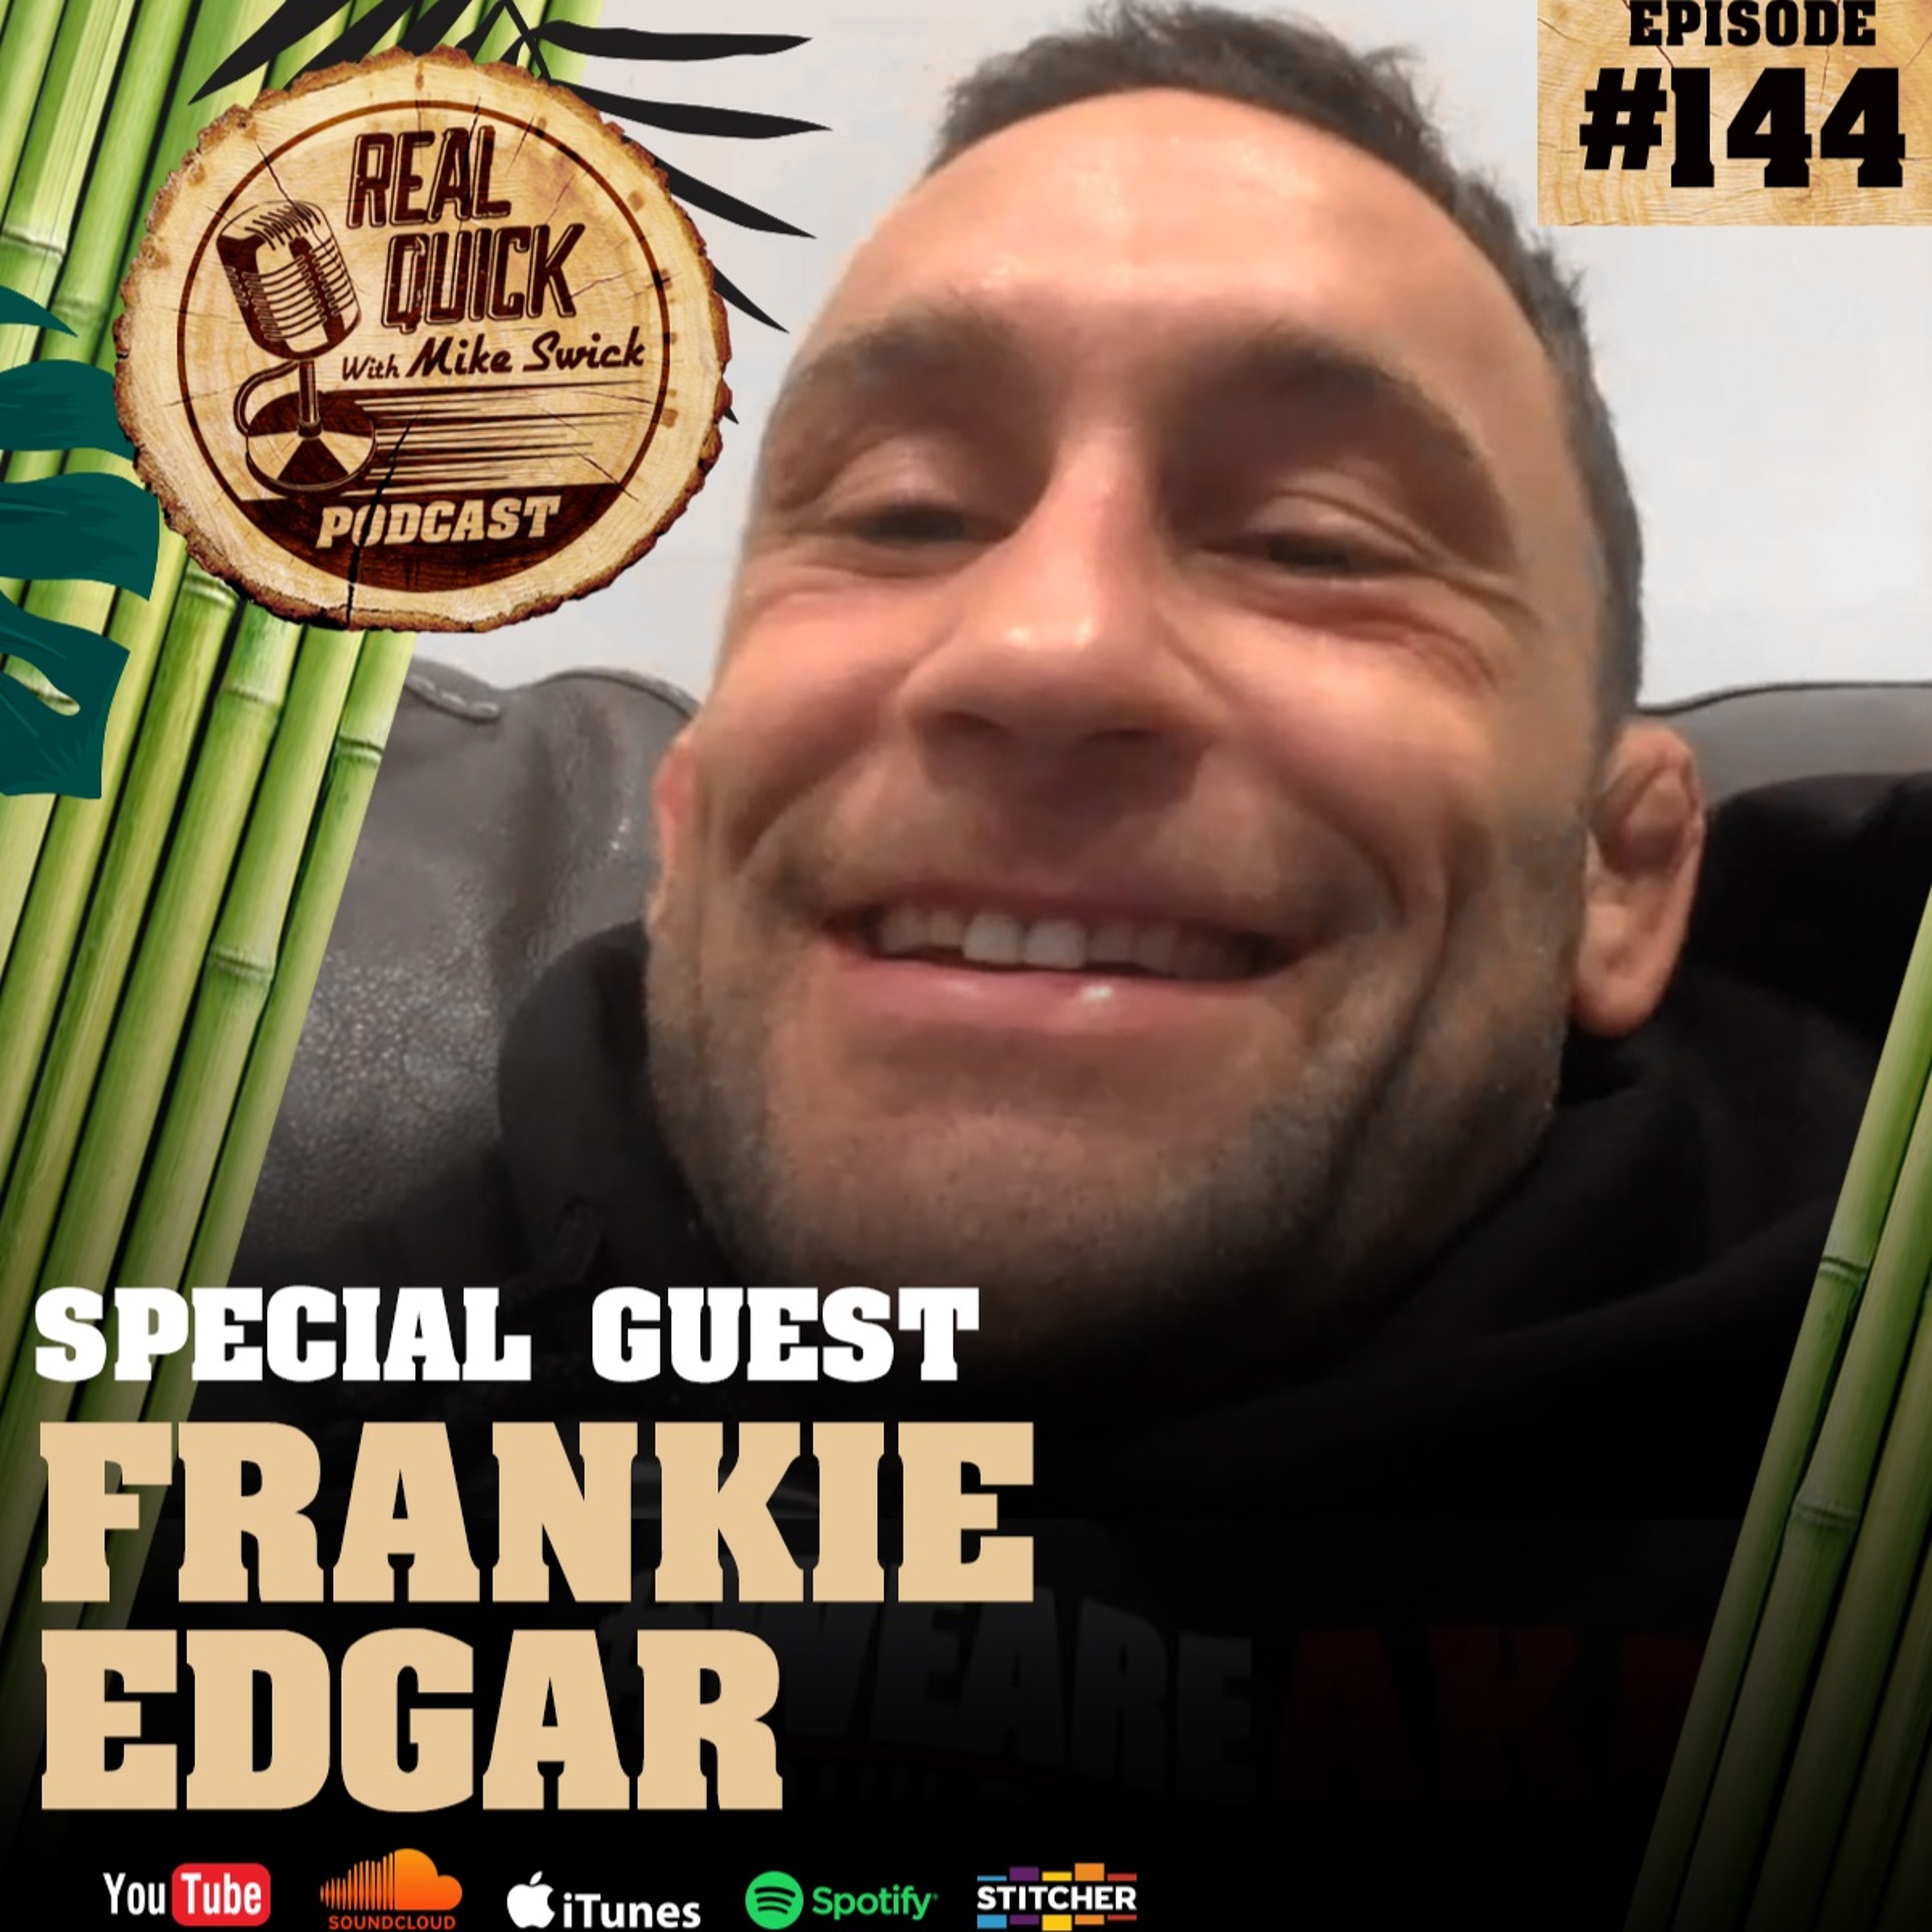 Frankie Edgar (Guest) - EP 144 "Be careful what you wish for!"